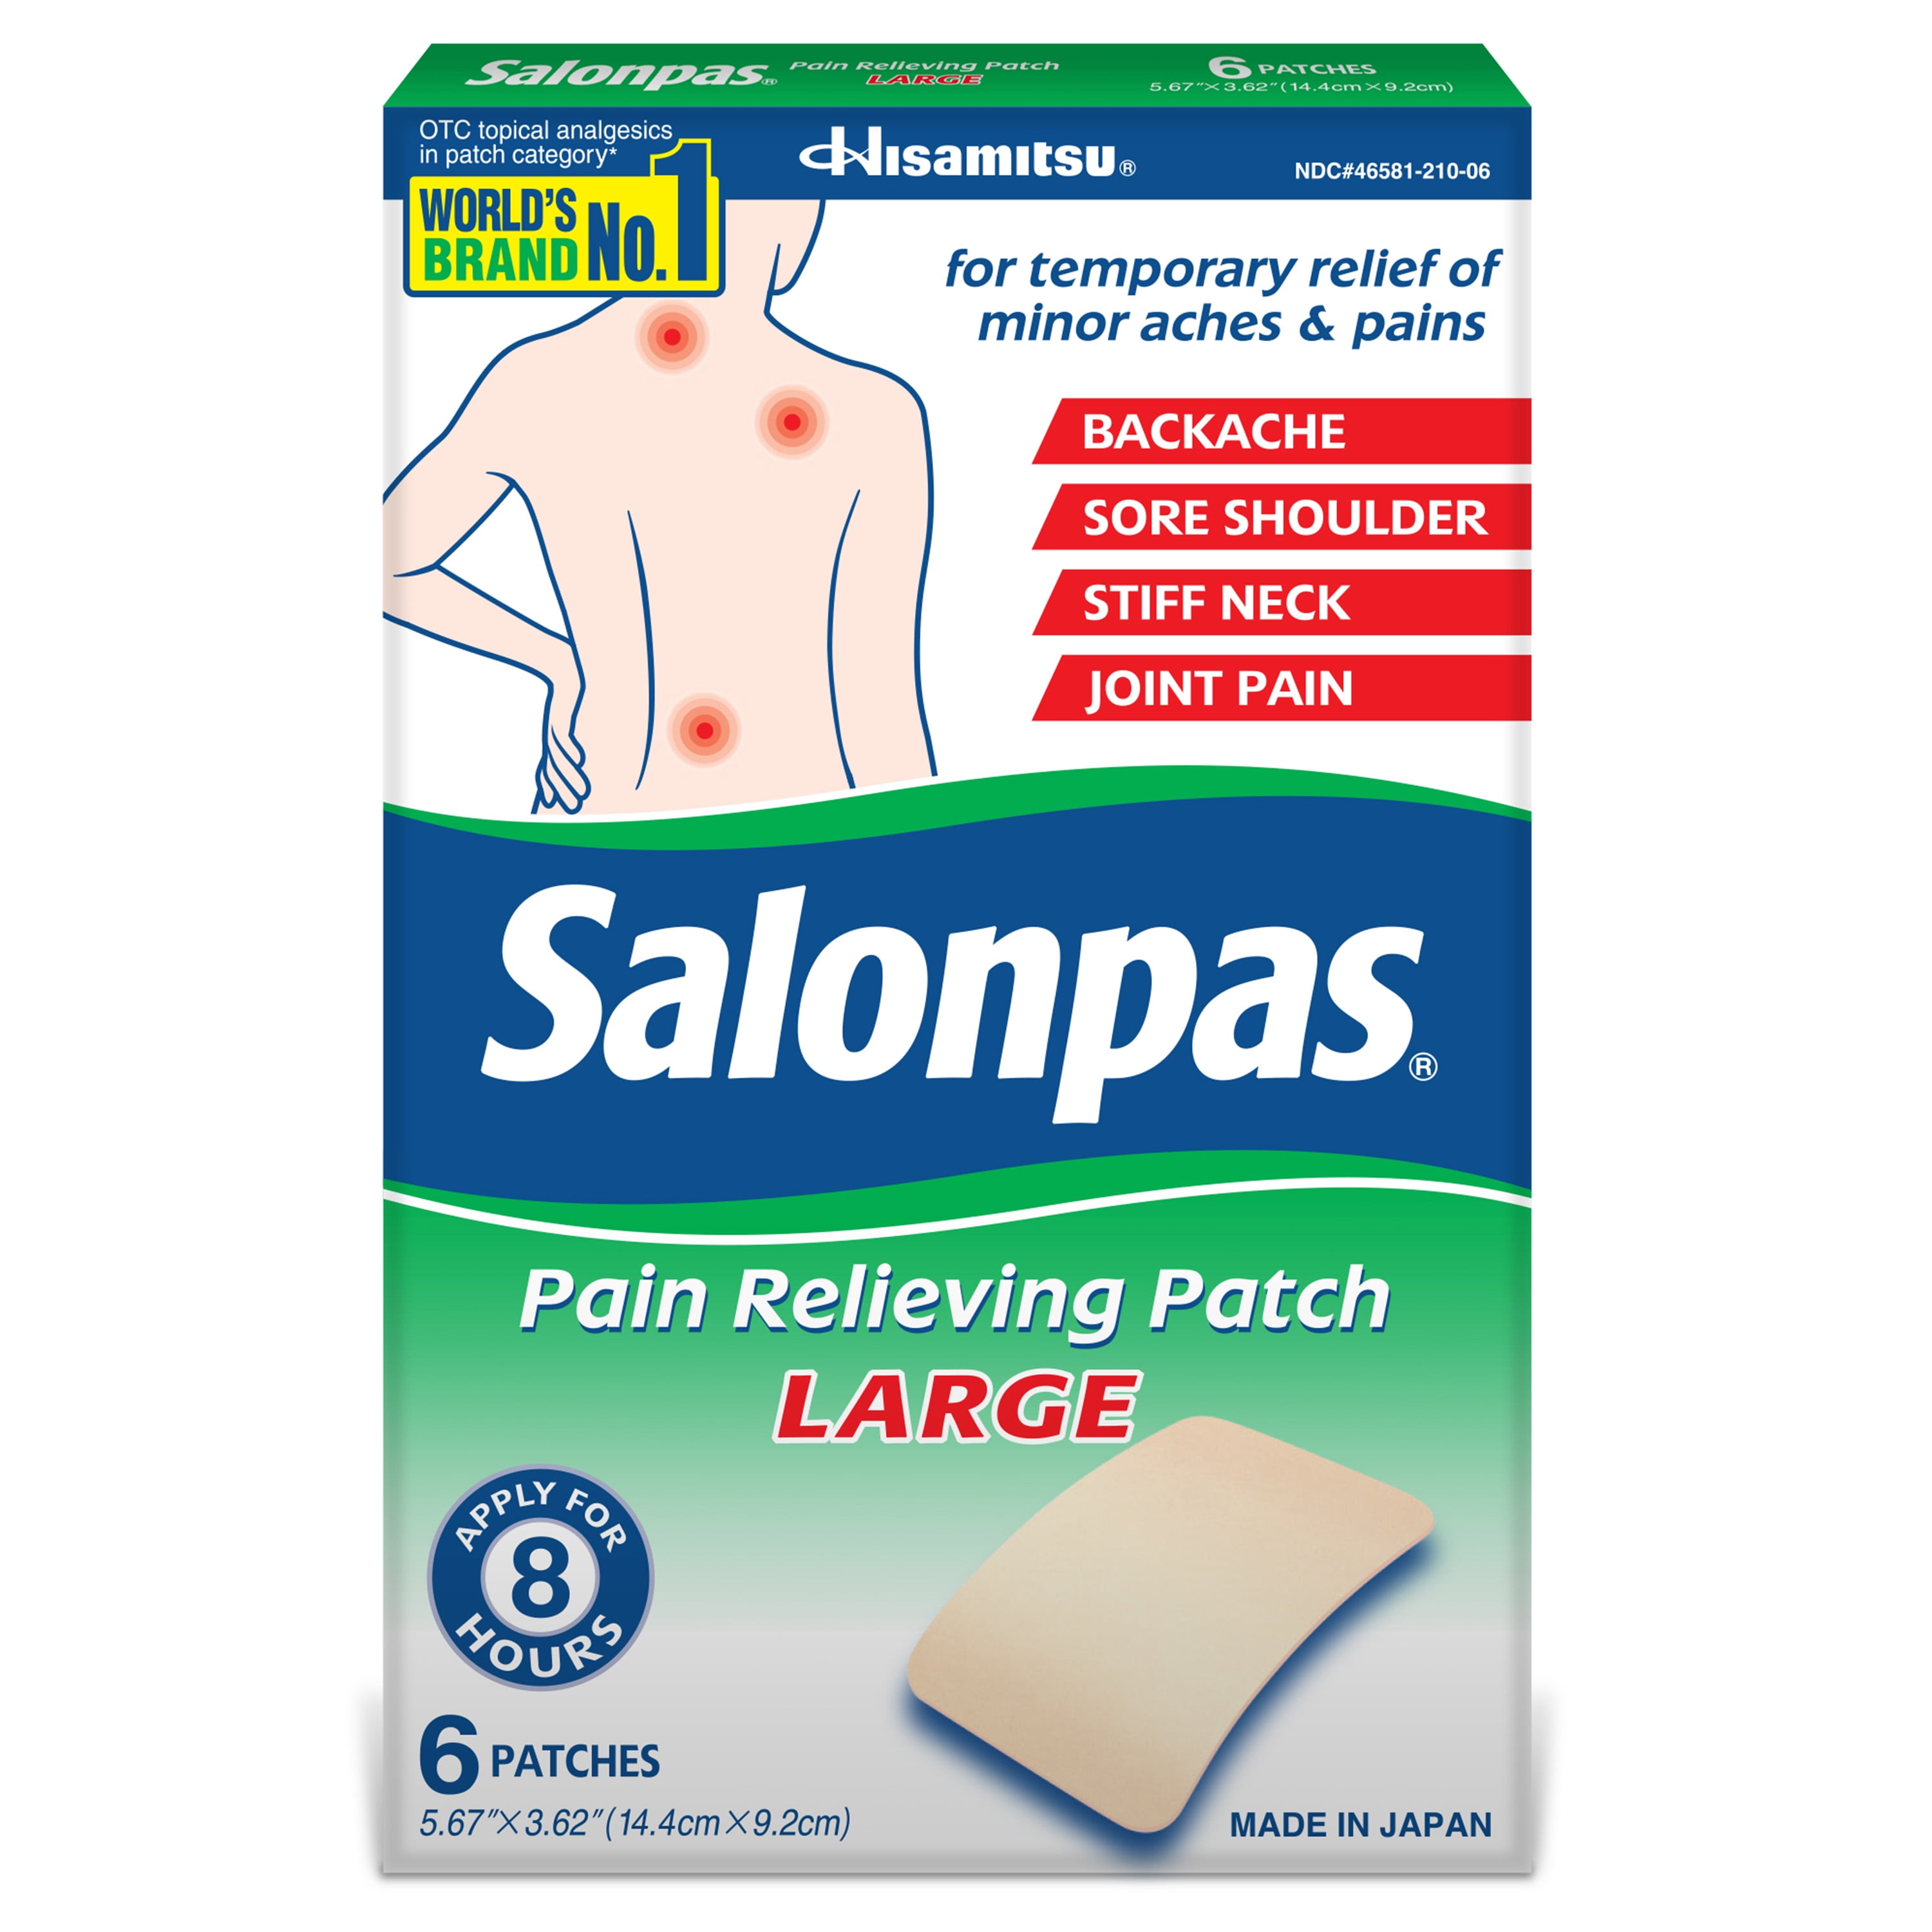 Salonpas Pain Relieving Patch, 8-Hour Pain Relief, 6 Large Patches